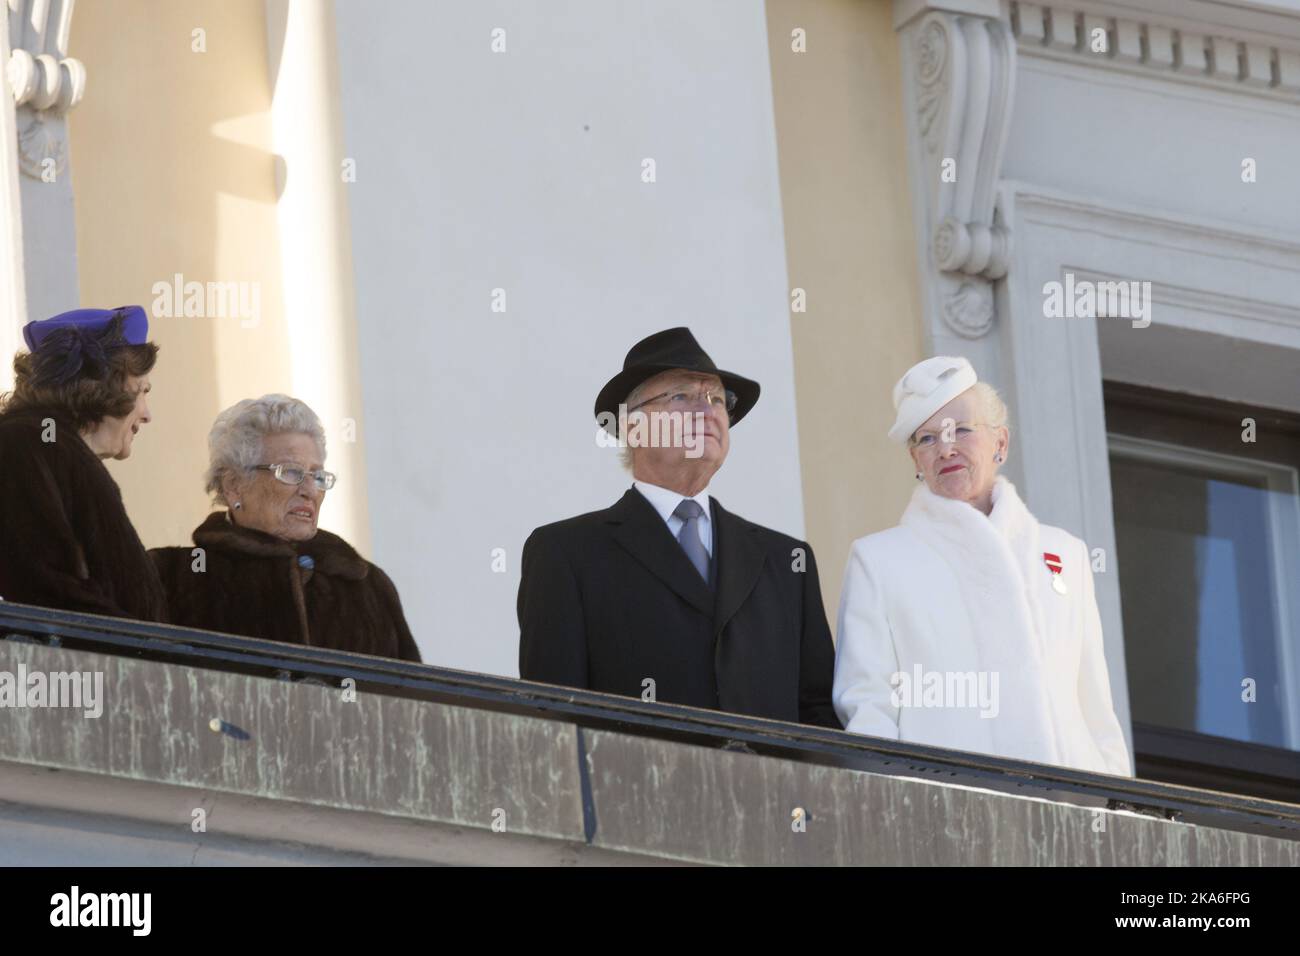 Oslo, Norway 20160117. This weekend Their Majesties King Harald and Queen Sonja mark the 25th anniversary of their ascension to the Norwegian throne. The Royal Family attend the Winter games in the Palace Square. On the balcony Queen Silvia, Princess Astrid, King Carl Gustav of Sweden and Queen Margrethe of Denmark. Foto: Terje Bendiksby / NTB scanpix Oslo 20160117. Det norske kongeparets 25-arsjubileum som regenter. Dronning Silvia, prinsesse Astrid, kong Carl Gustav og Dronning Margrethe under sÃ¸ndagens feiring pa Slottsplassen. Foto: Terje Bendiksby / NTB scanpix  Stock Photo